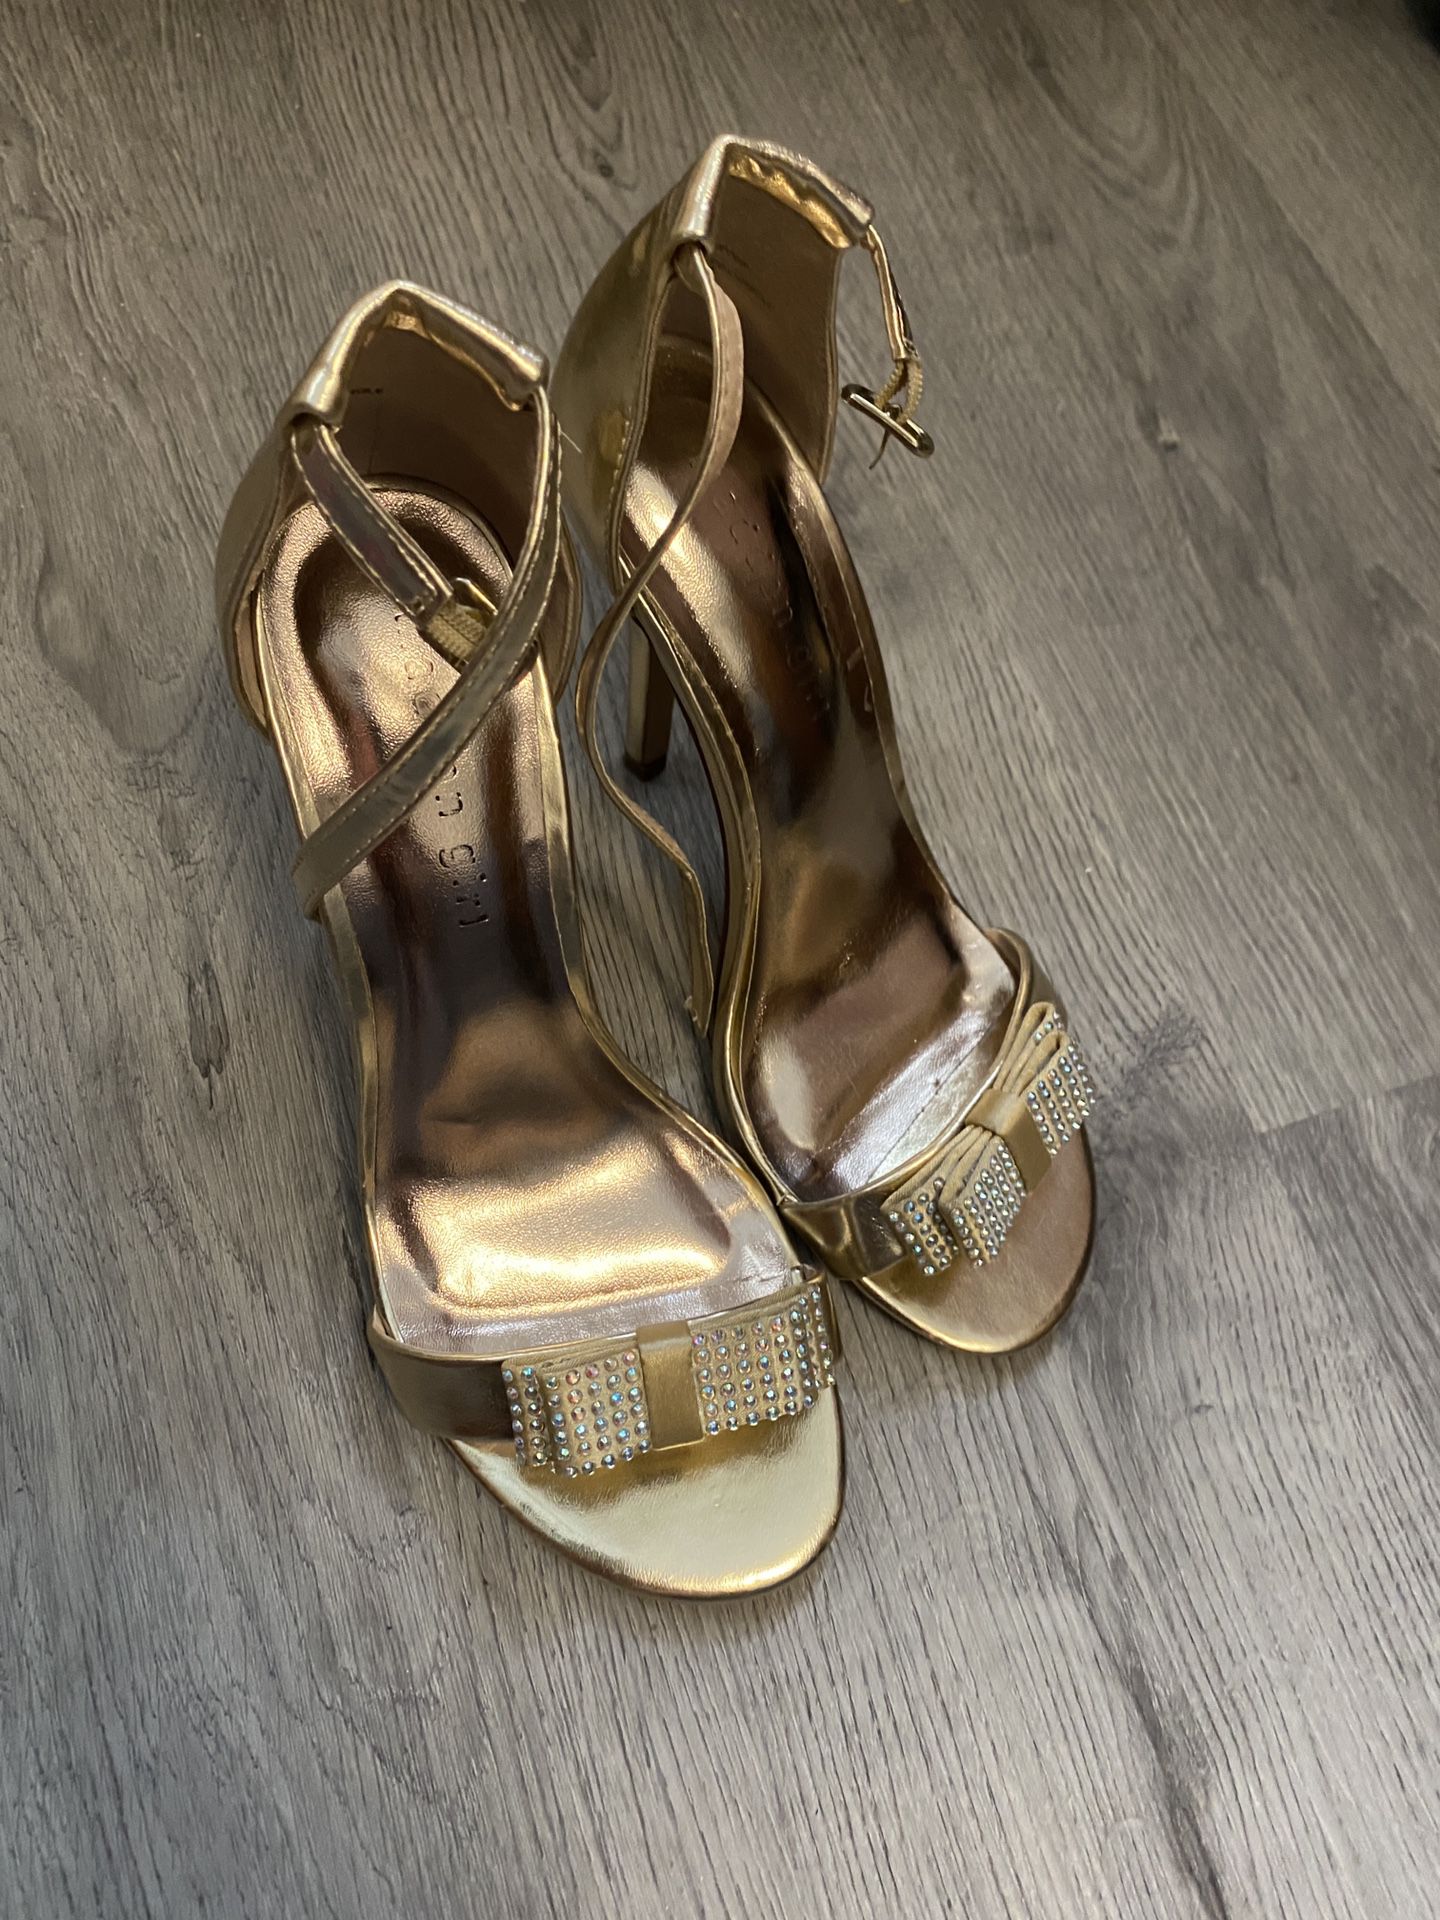 Stunning Gold 6” Heels with Bejeweled Bow - Women’s Size 7.5